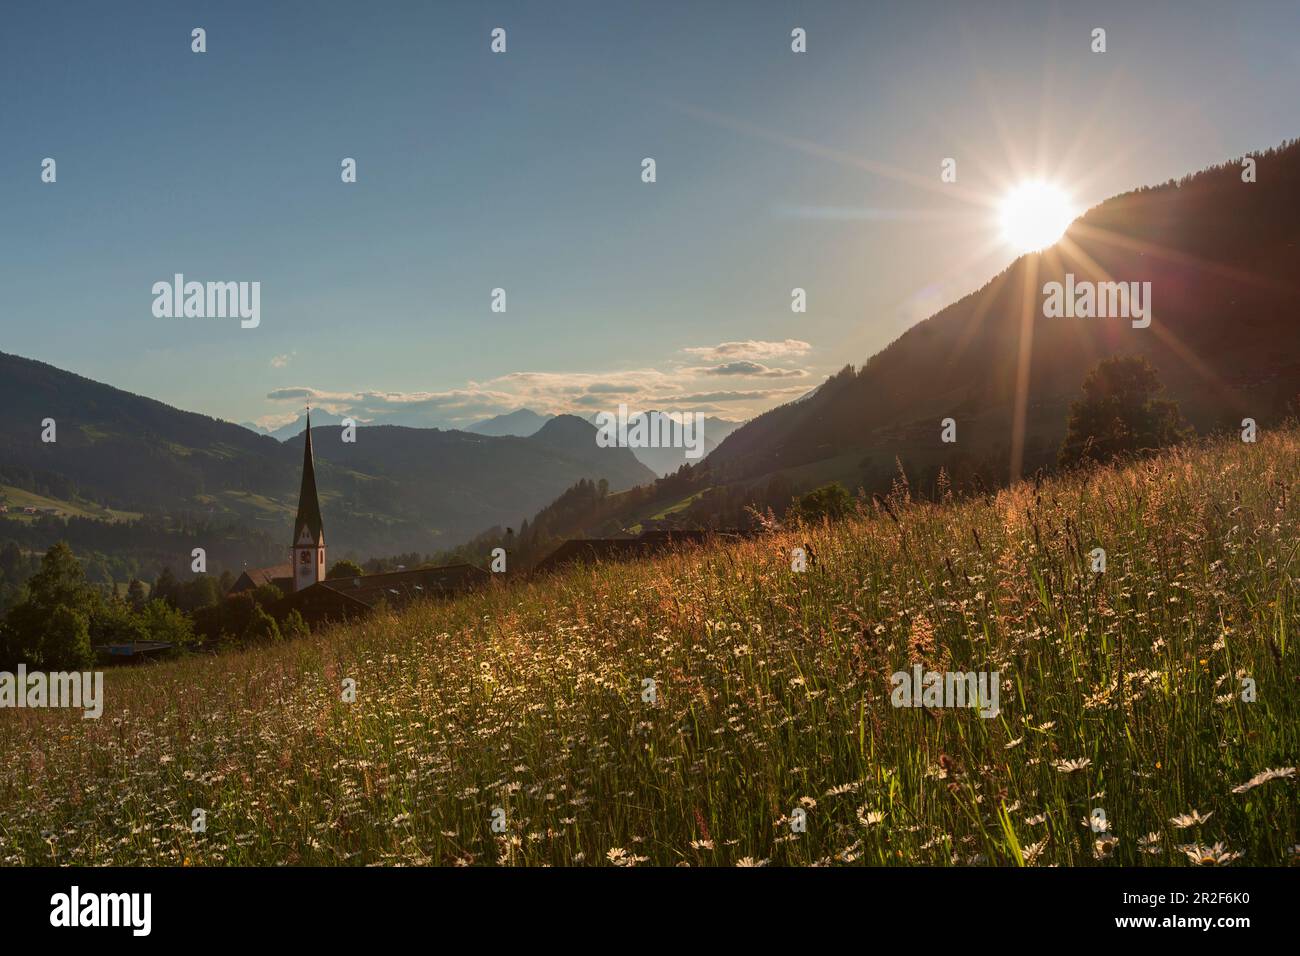 A daisy field at sunset in Alpbach, Tyrol. Just before the meadow is mowed Stock Photo